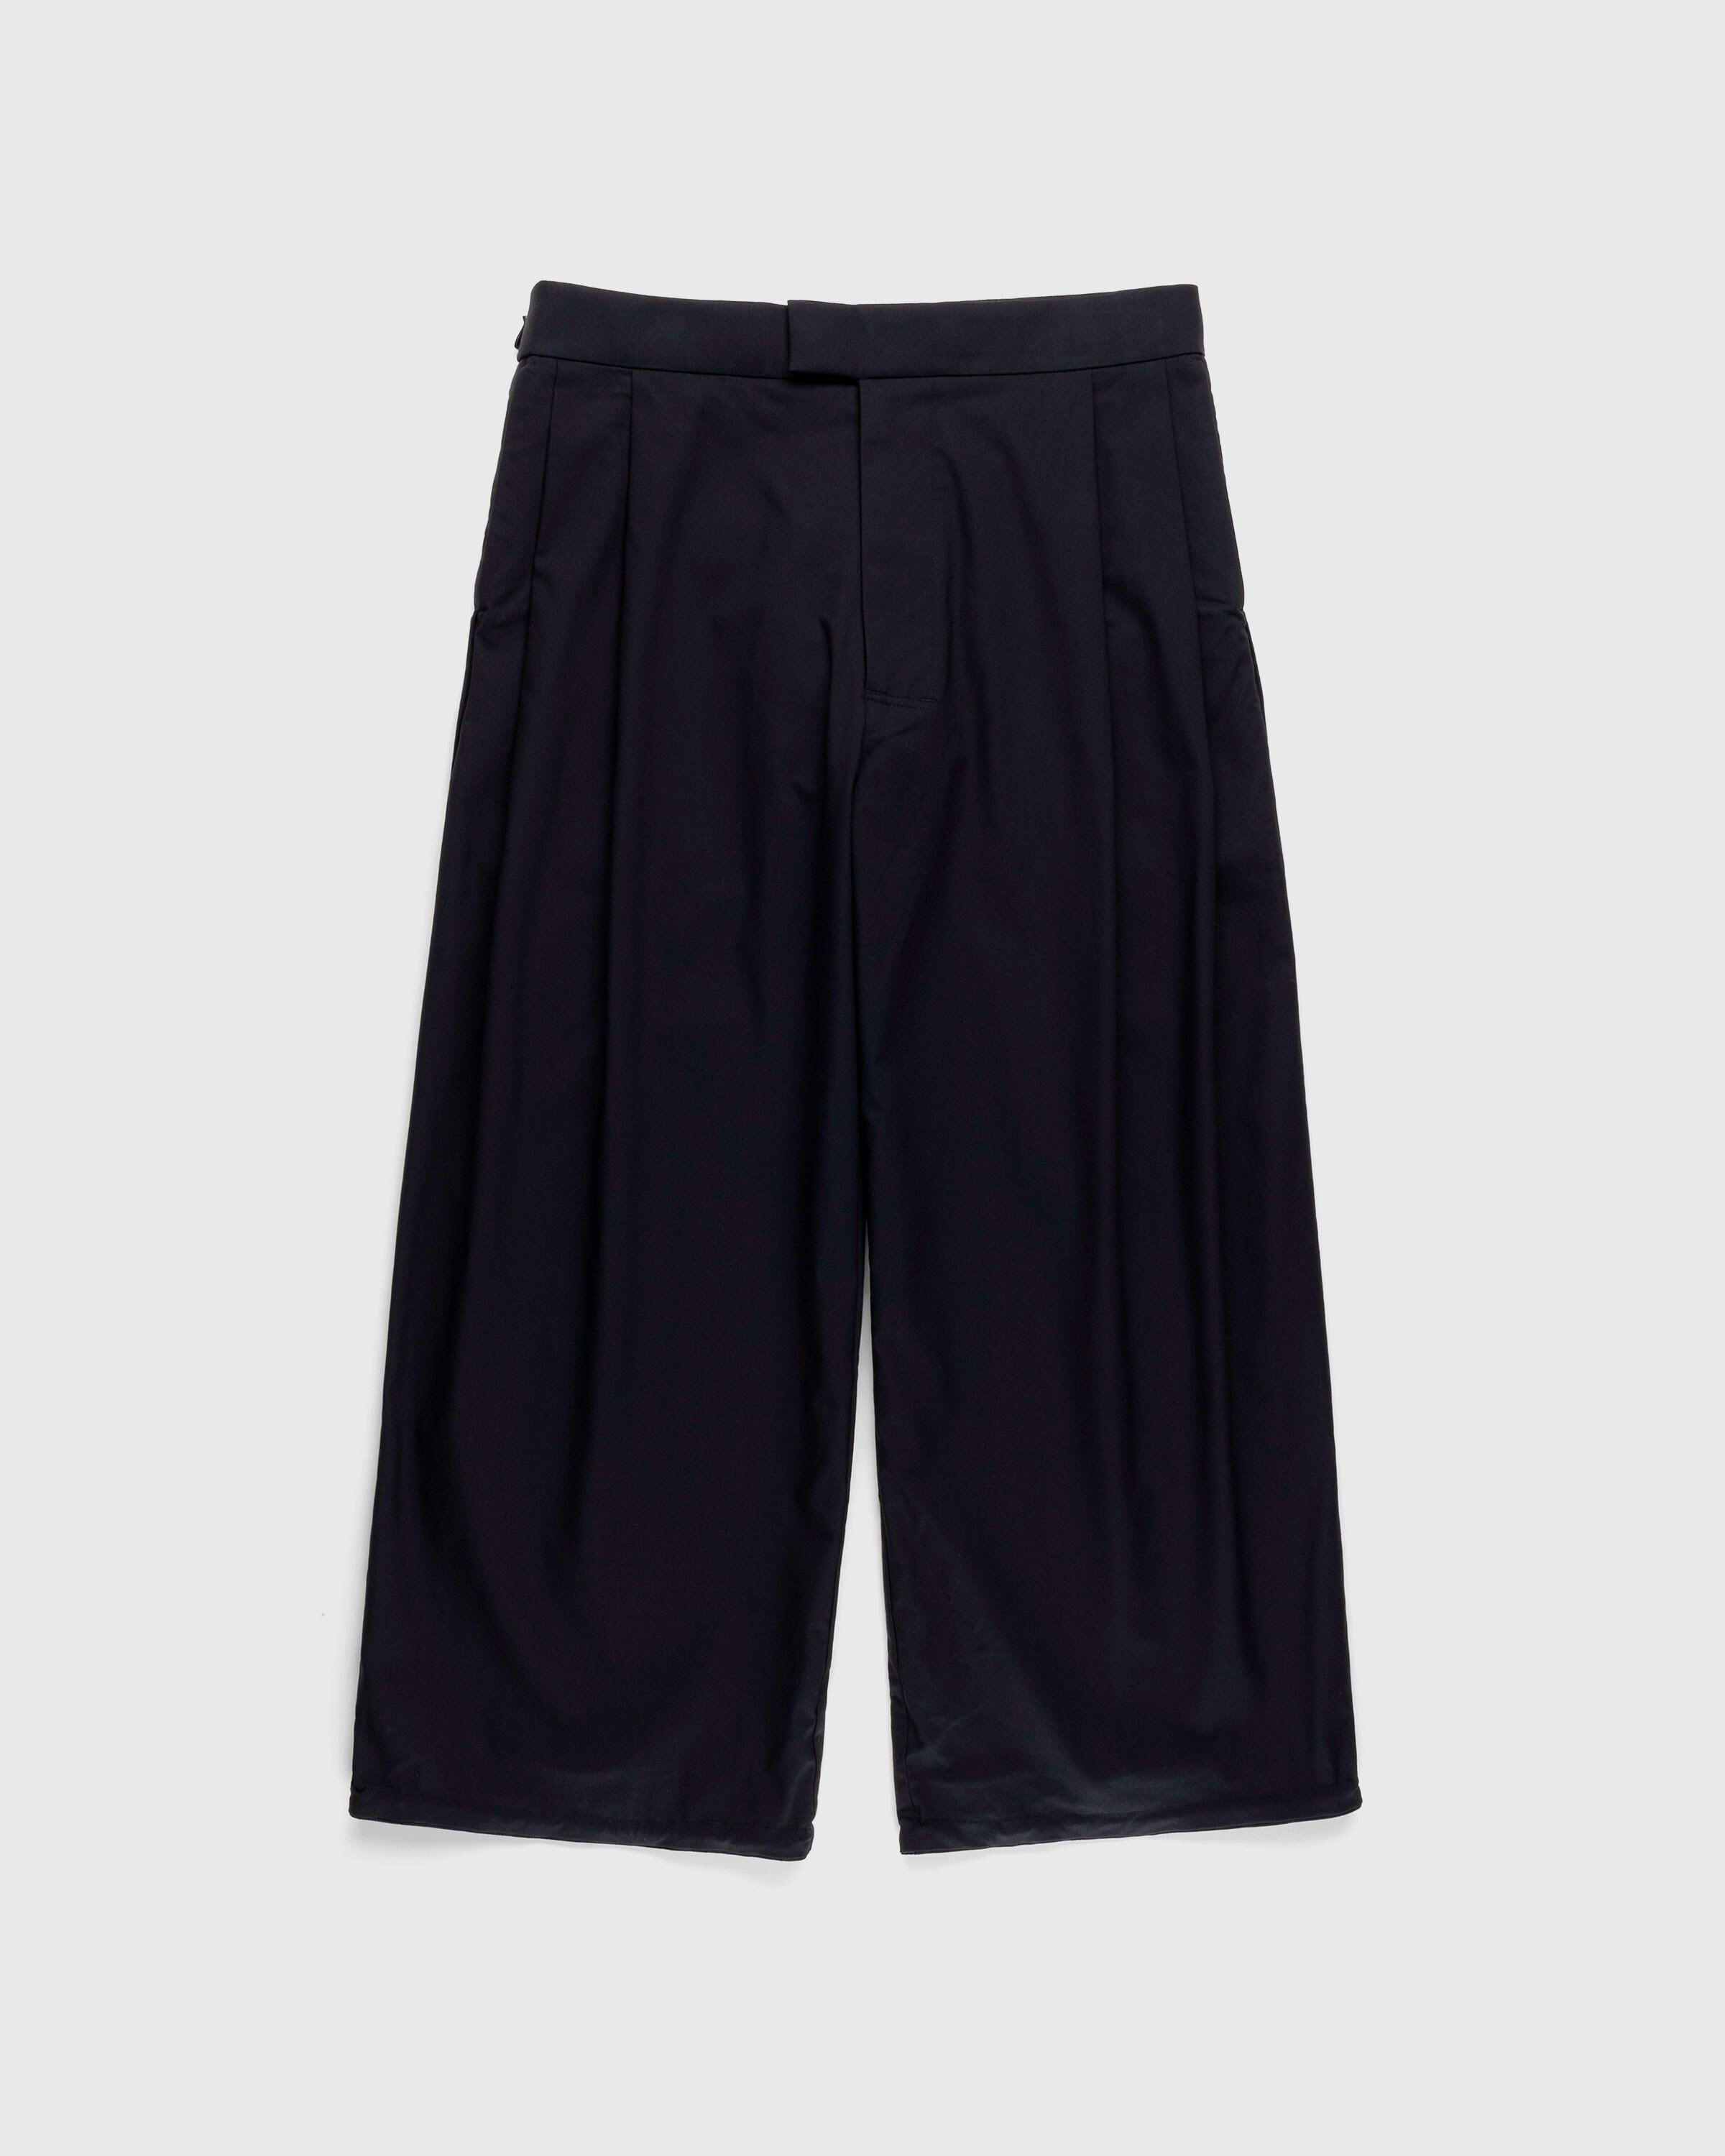 ACRONYM – P48-CH Micro Twill Pleated Trouser Black - Trousers - Black - Image 1